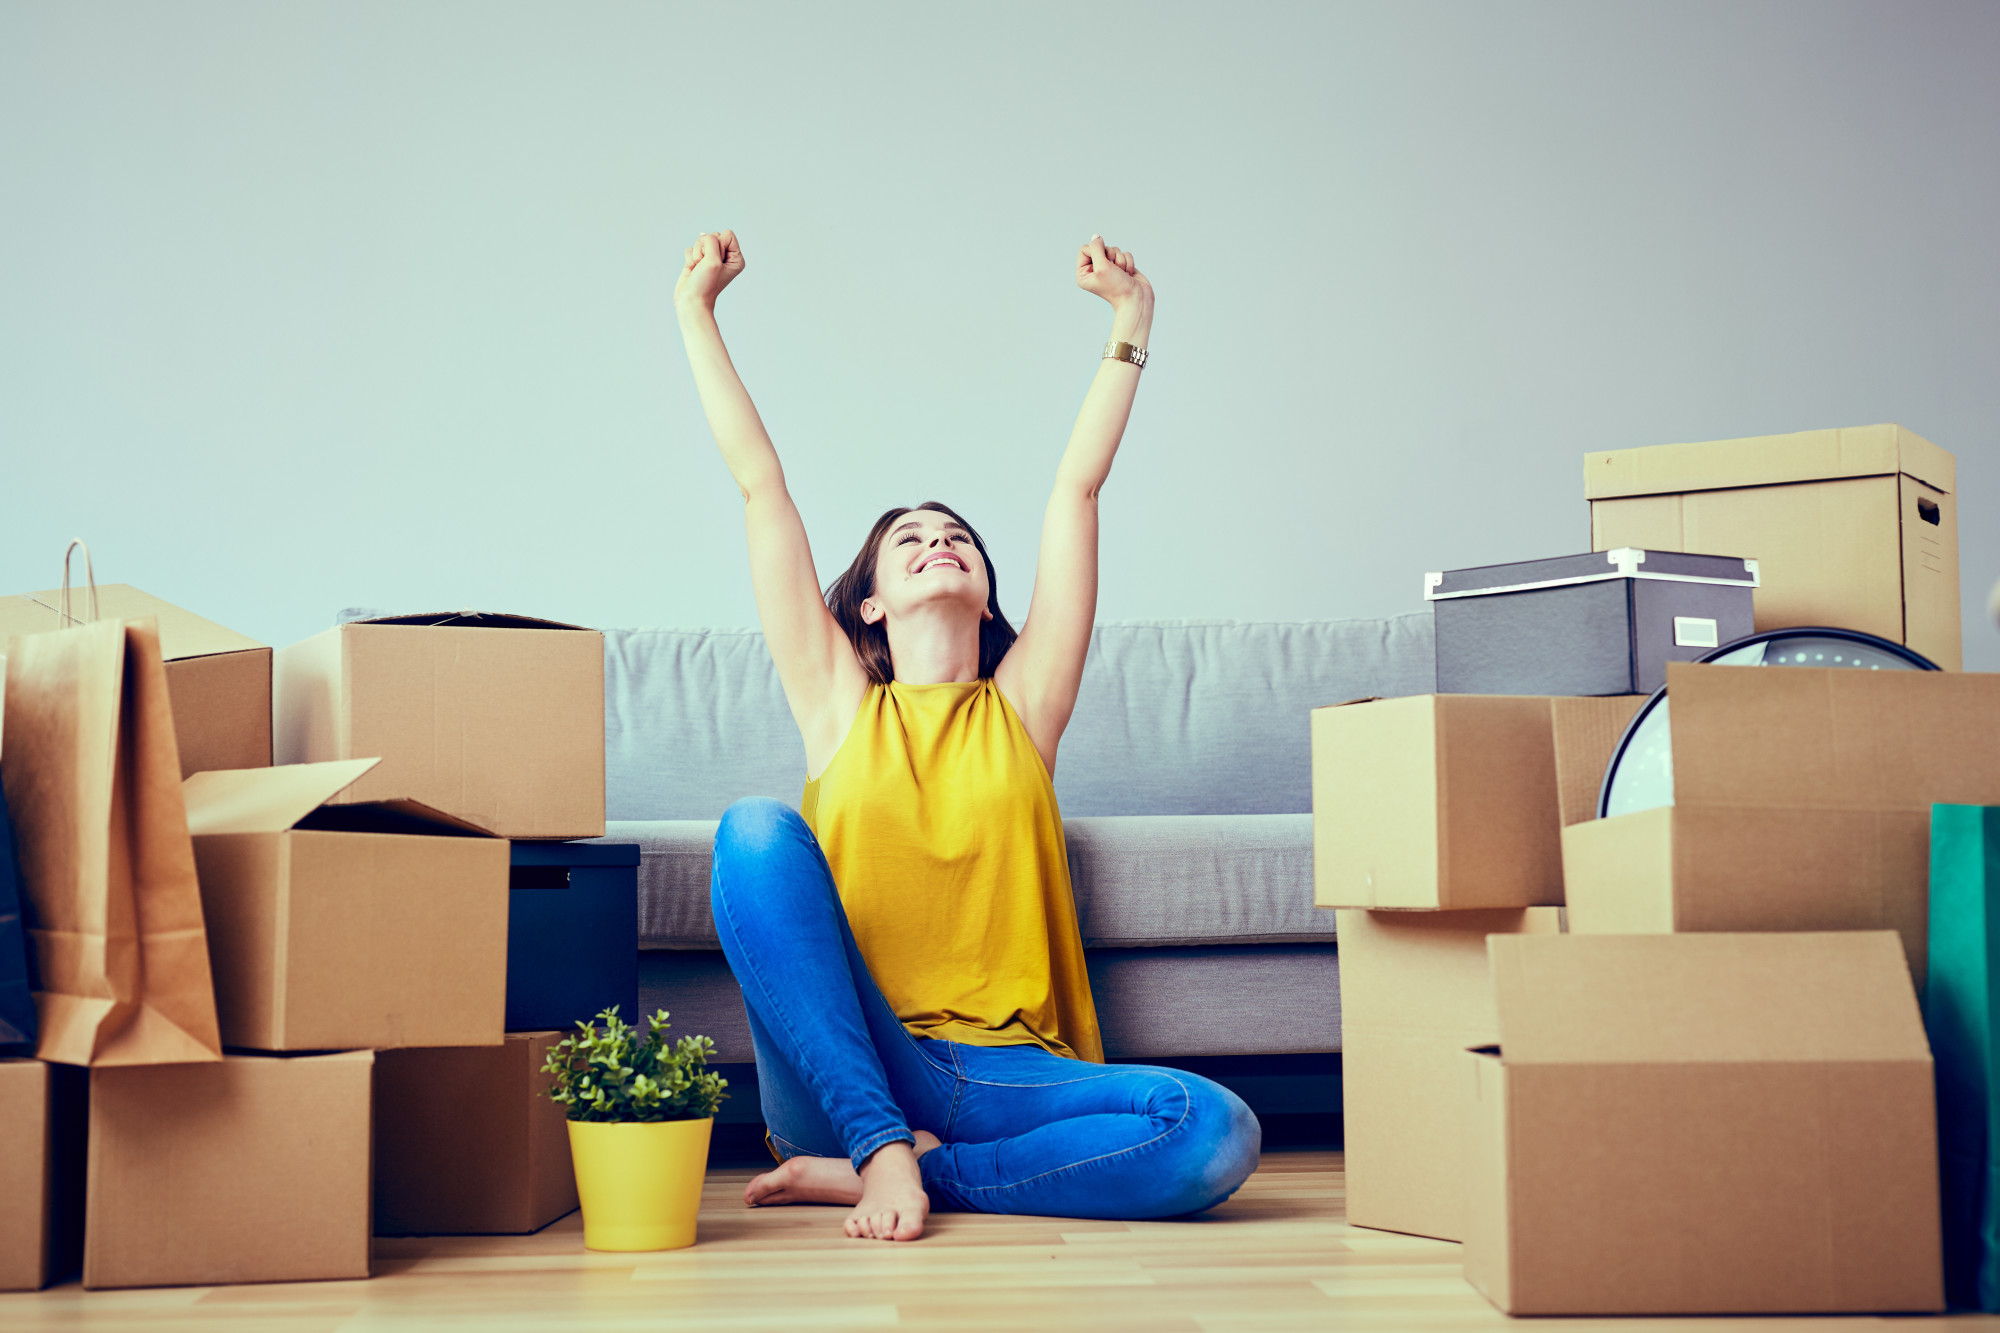 5 Crucial Items You Need Before Moving Into a New House